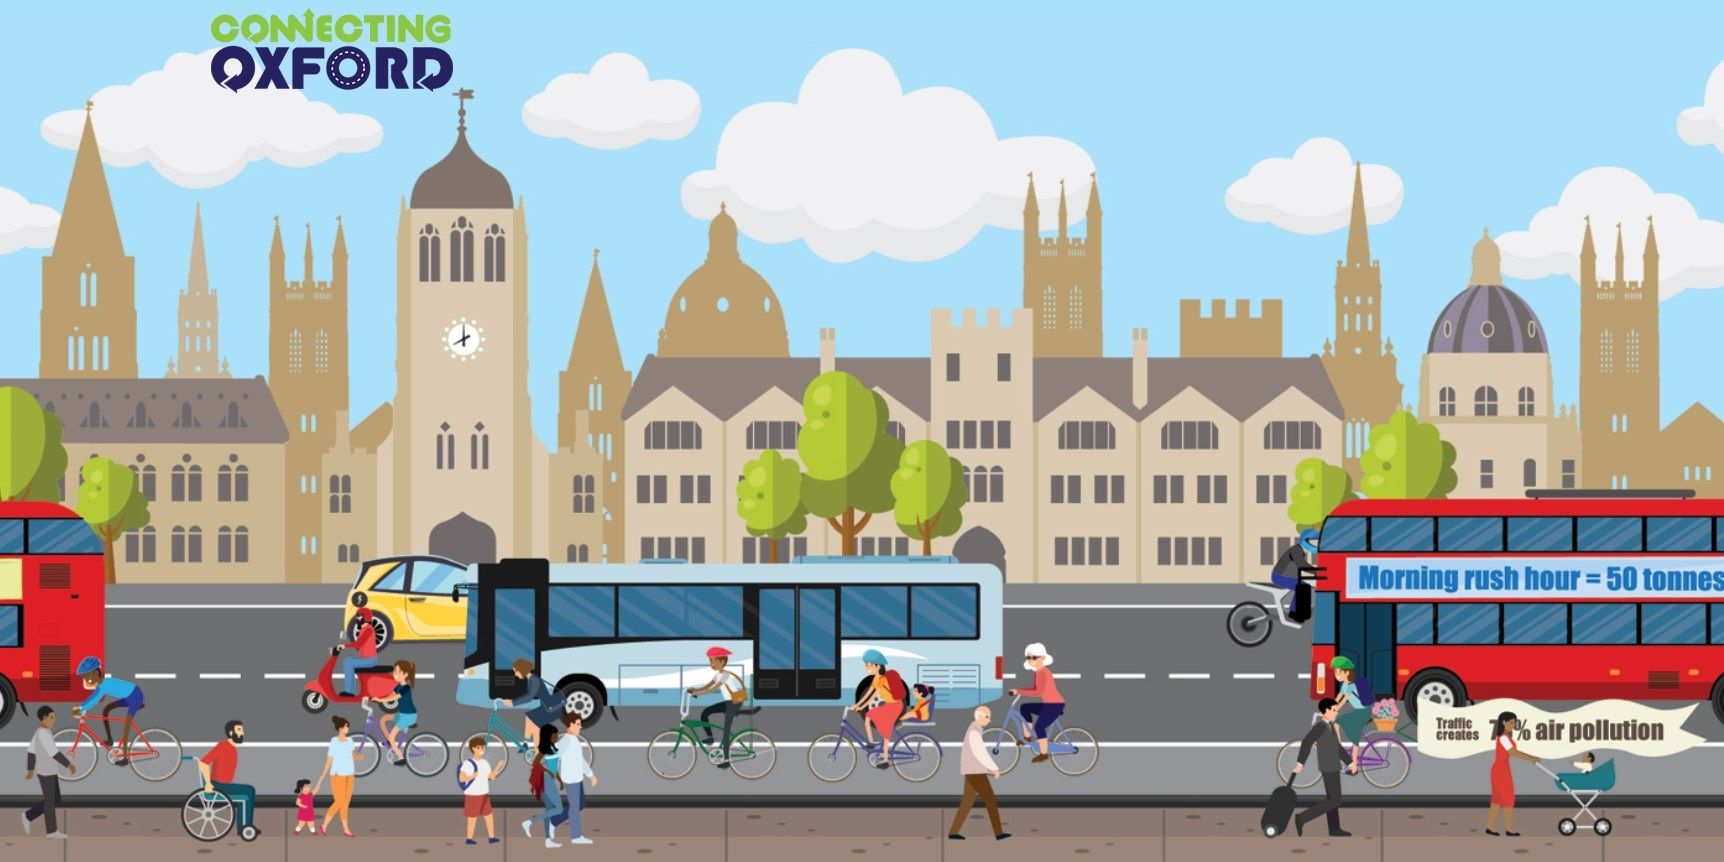 Street scene of Oxford city centre showing cars, buses, cyclists and pedestrians against the backdrop of the dreaming spires